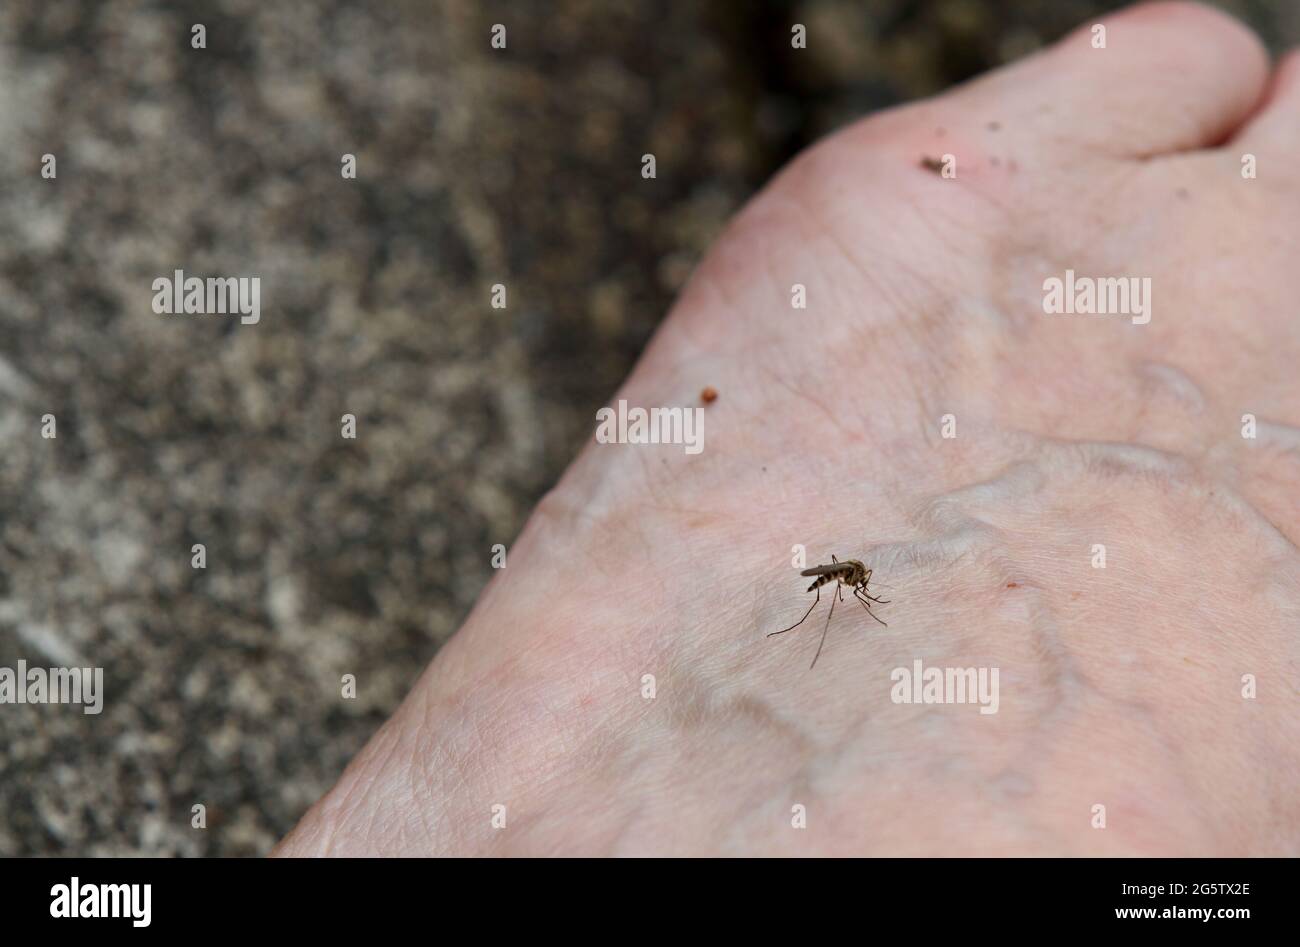 A mosquito sucking blood on a humans bare foot Stock Photo